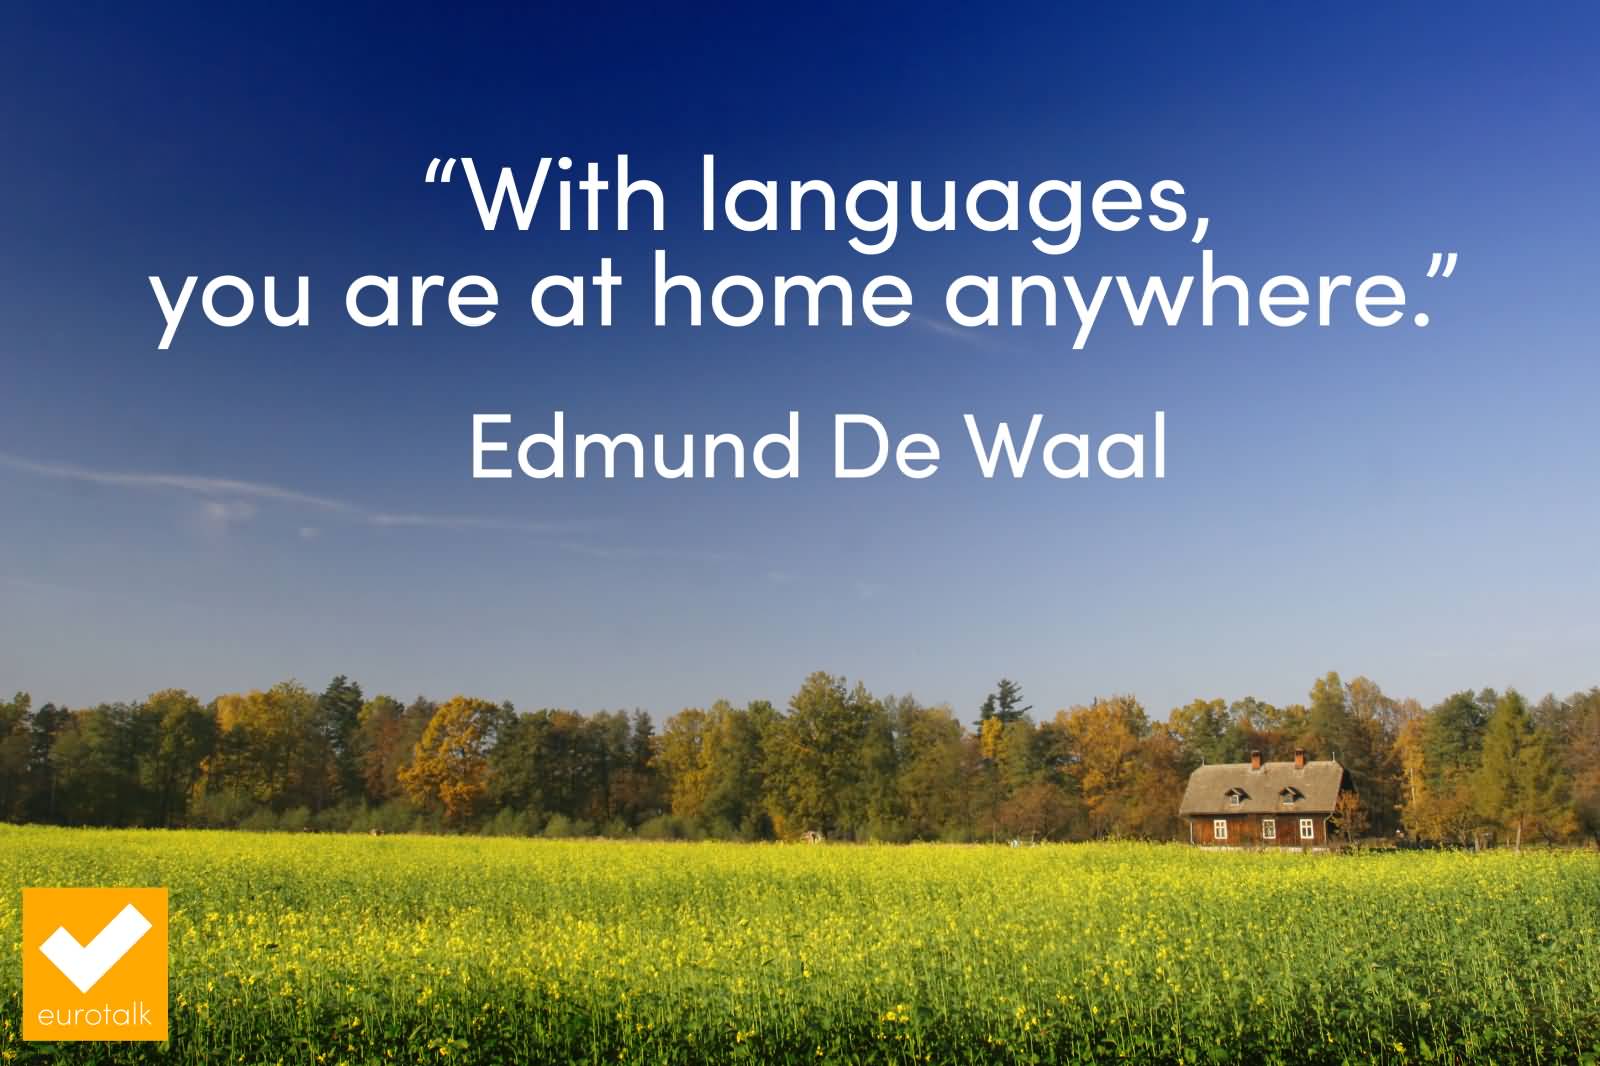 With languages, you are at home anywhere. Edmund De Waal